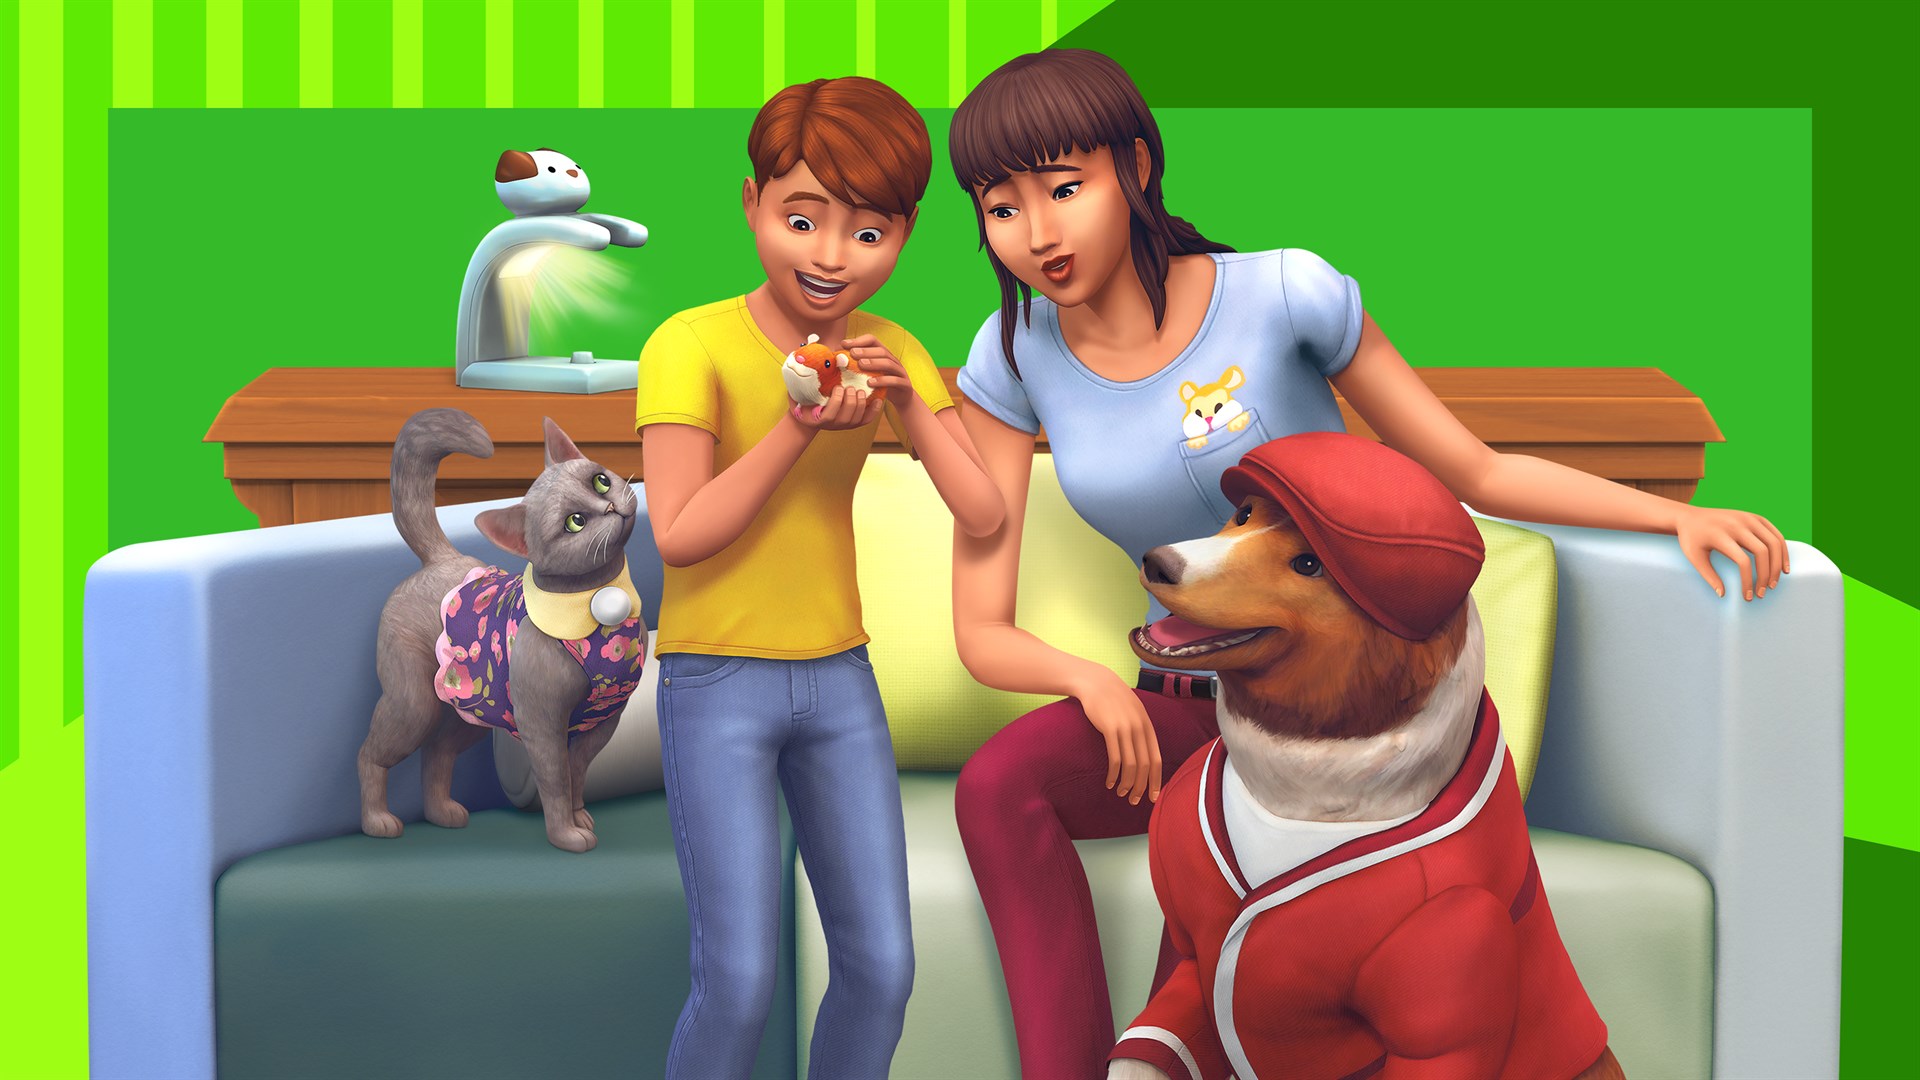 the newest sims pack is FREE!!! 